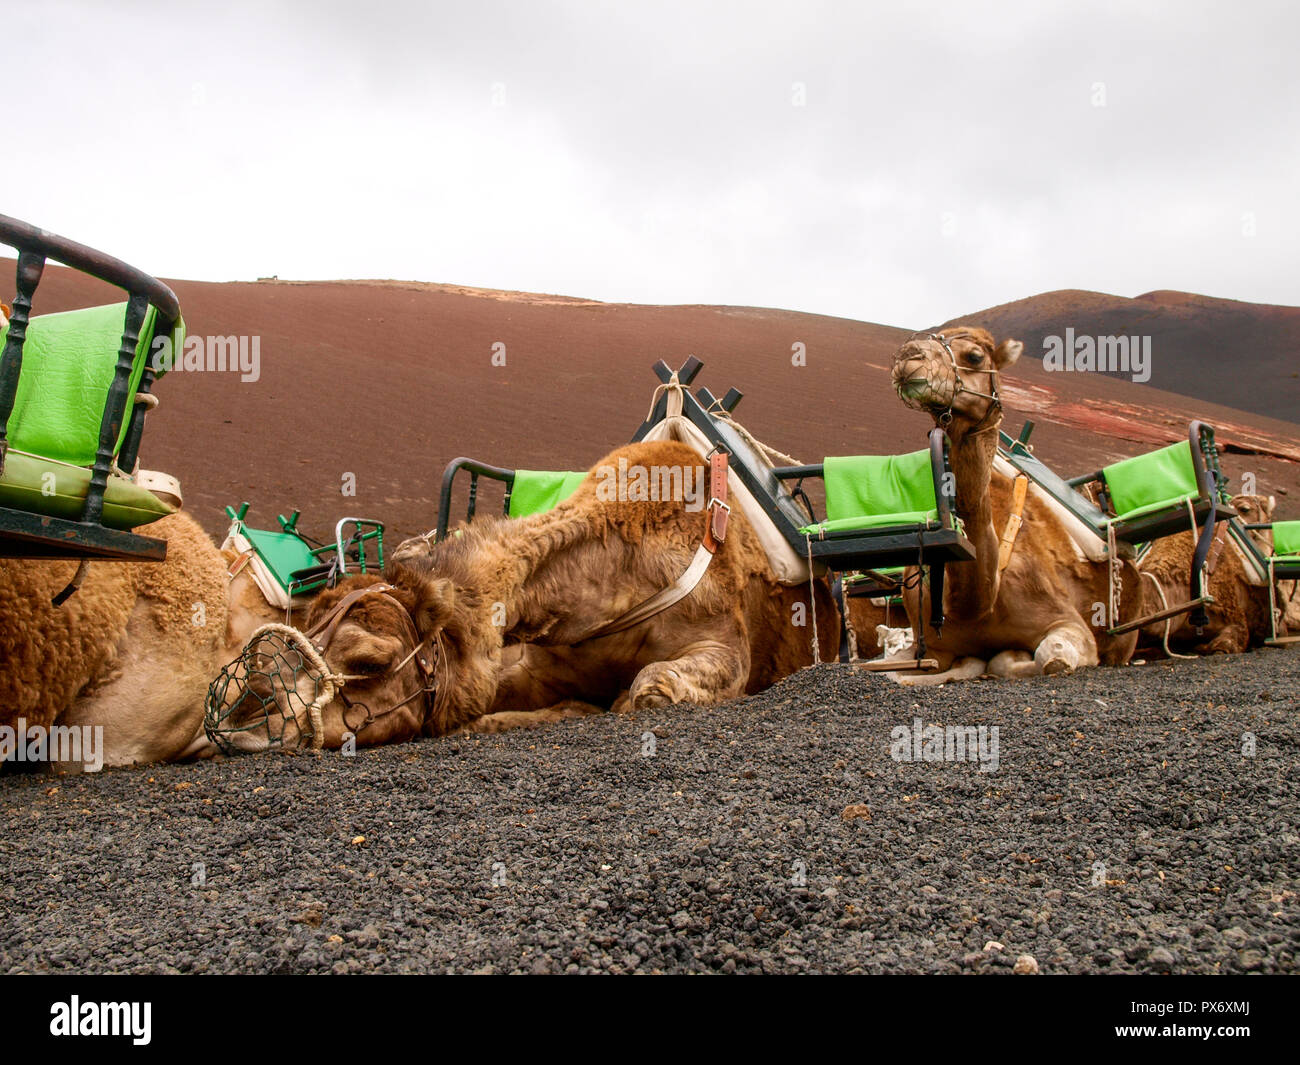 Lanzarote, Spain - June 1, 2017: Dromedaries for the transport of tourists on the Timanfaia lava dunes Stock Photo